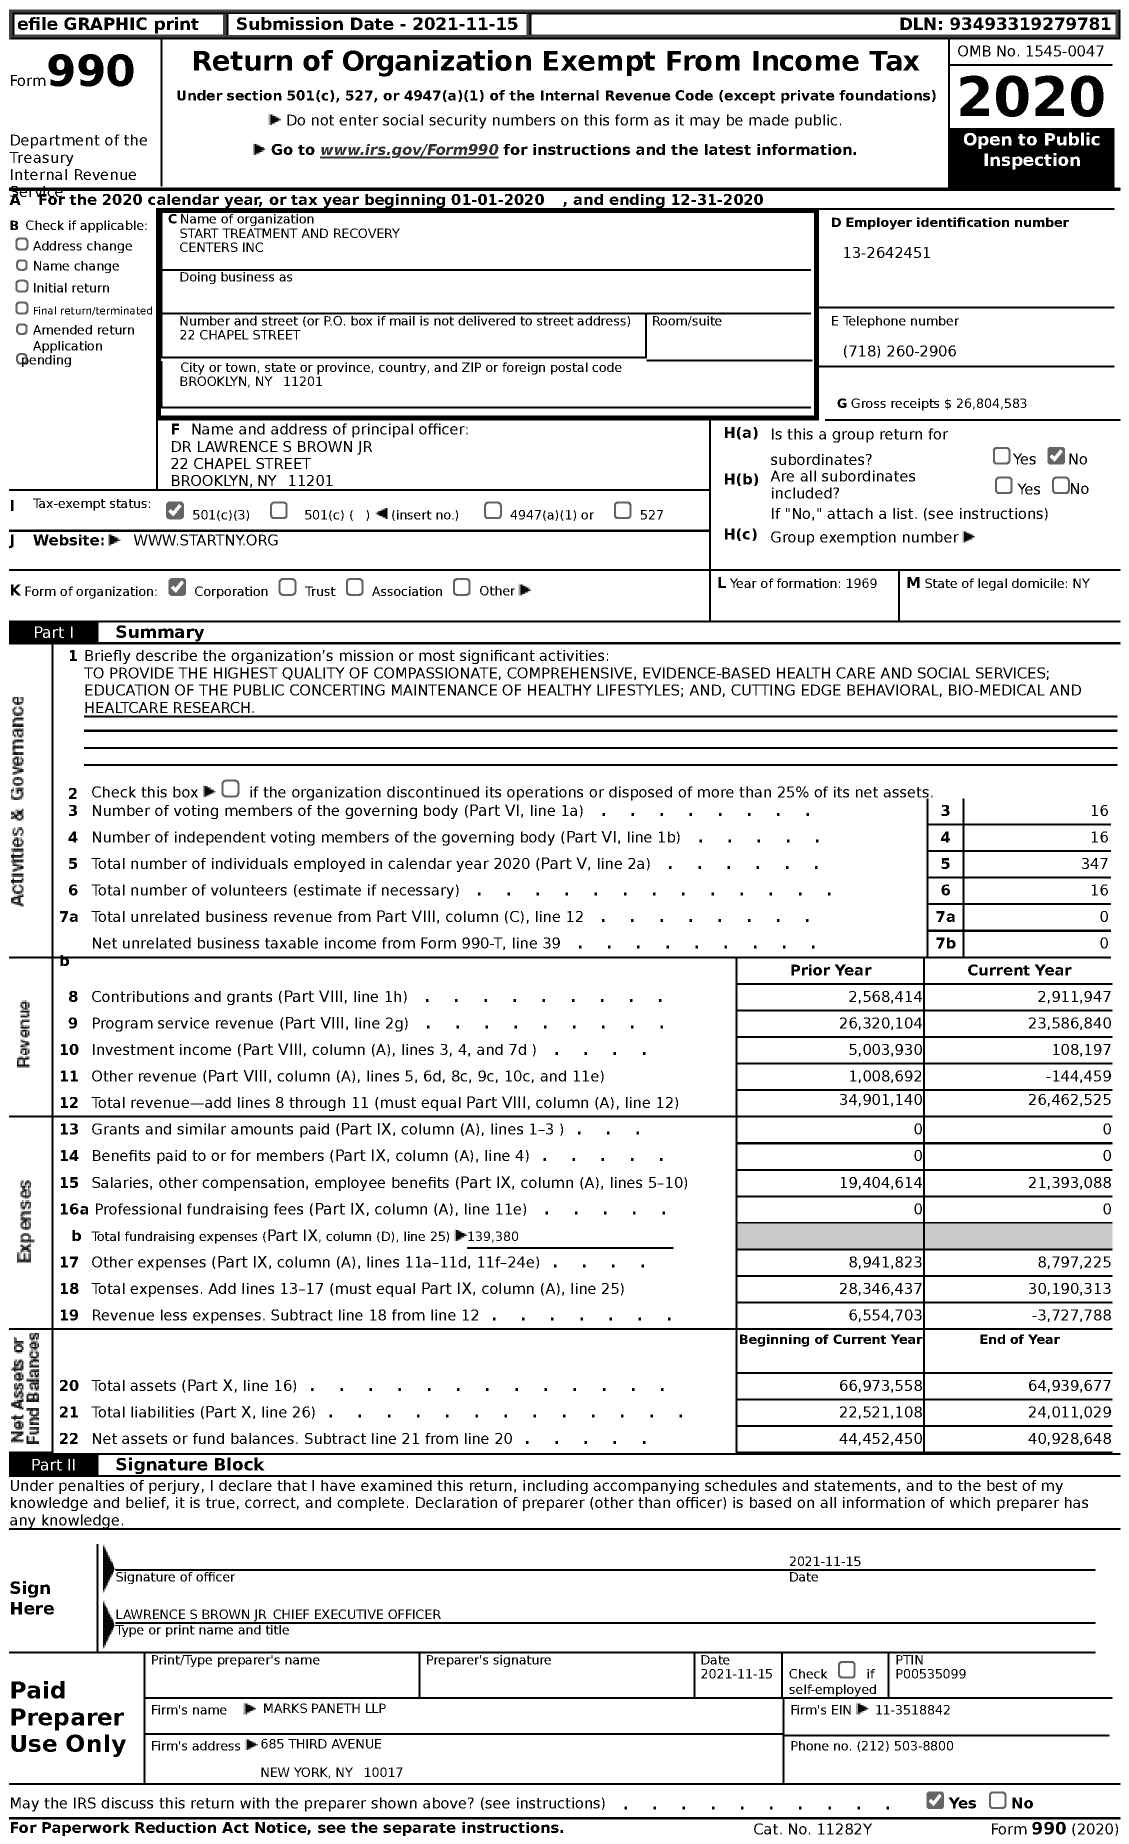 Image of first page of 2020 Form 990 for START Treatment and Recovery Centers